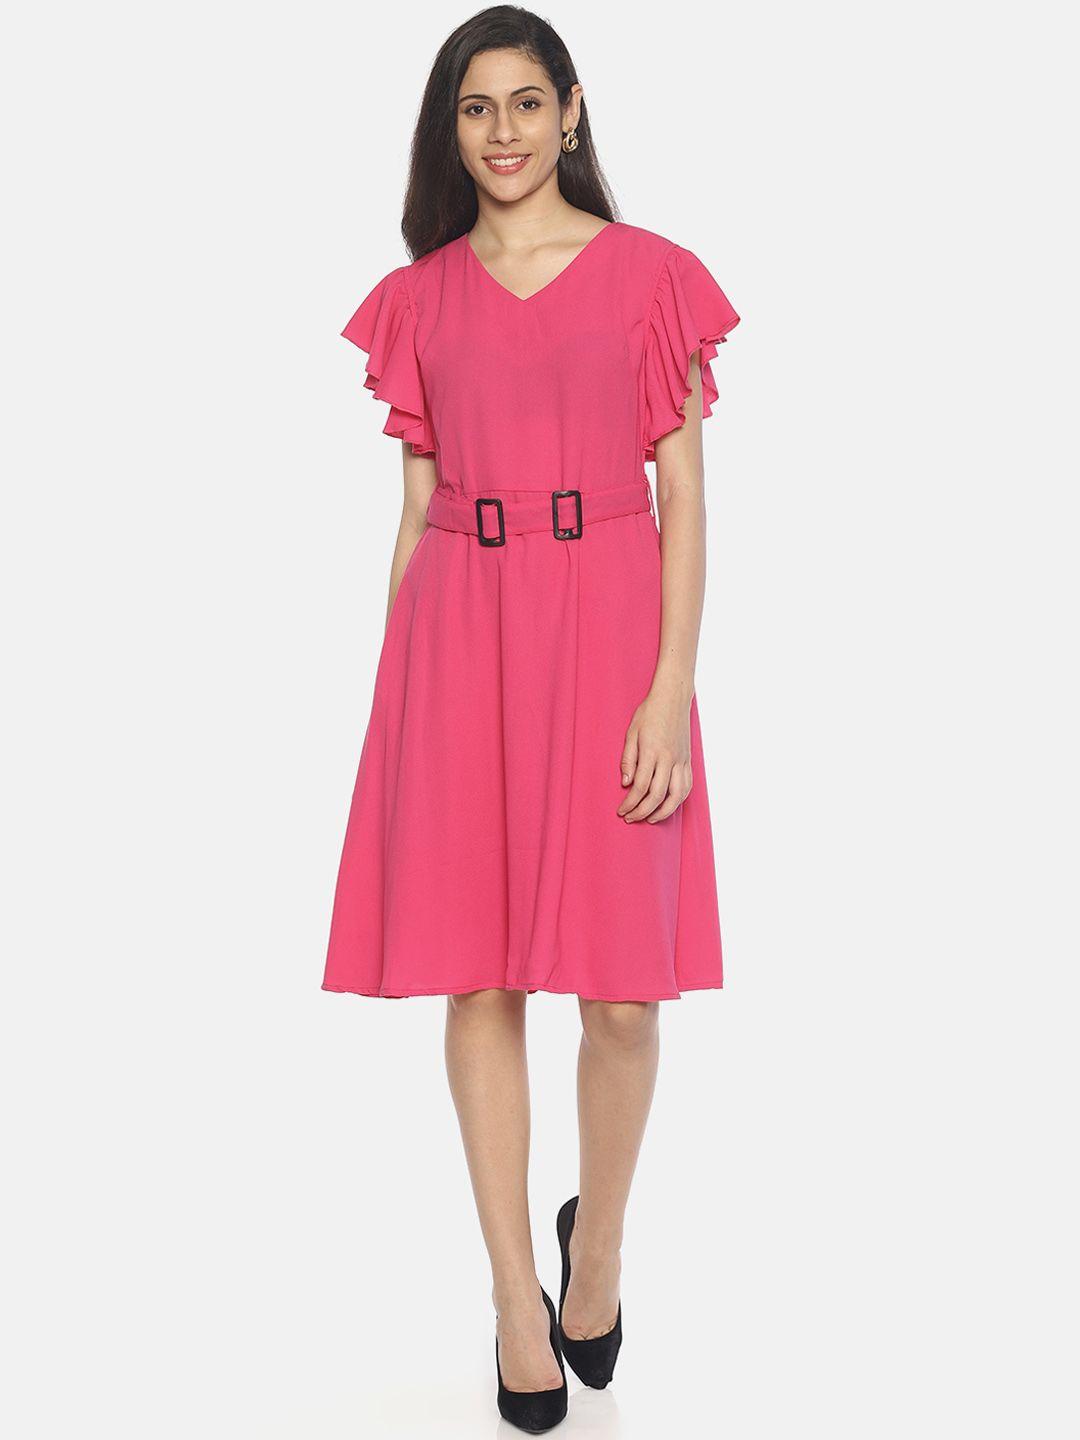 aara-women-solid-pink-fit-and-flare-dress